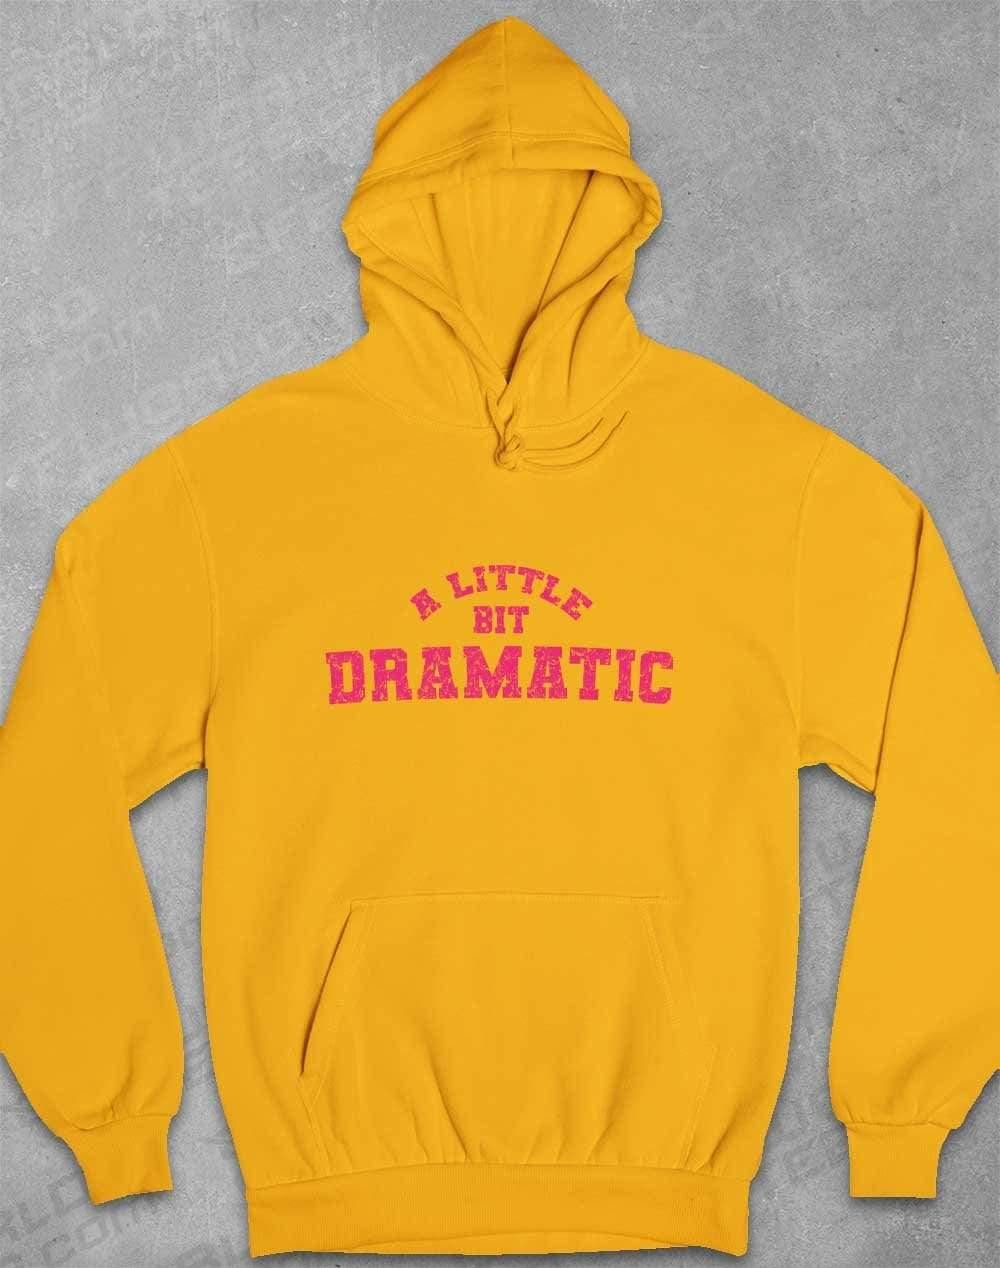 A Little Bit Dramatic Distressed Hoodie XS / Gold  - Off World Tees